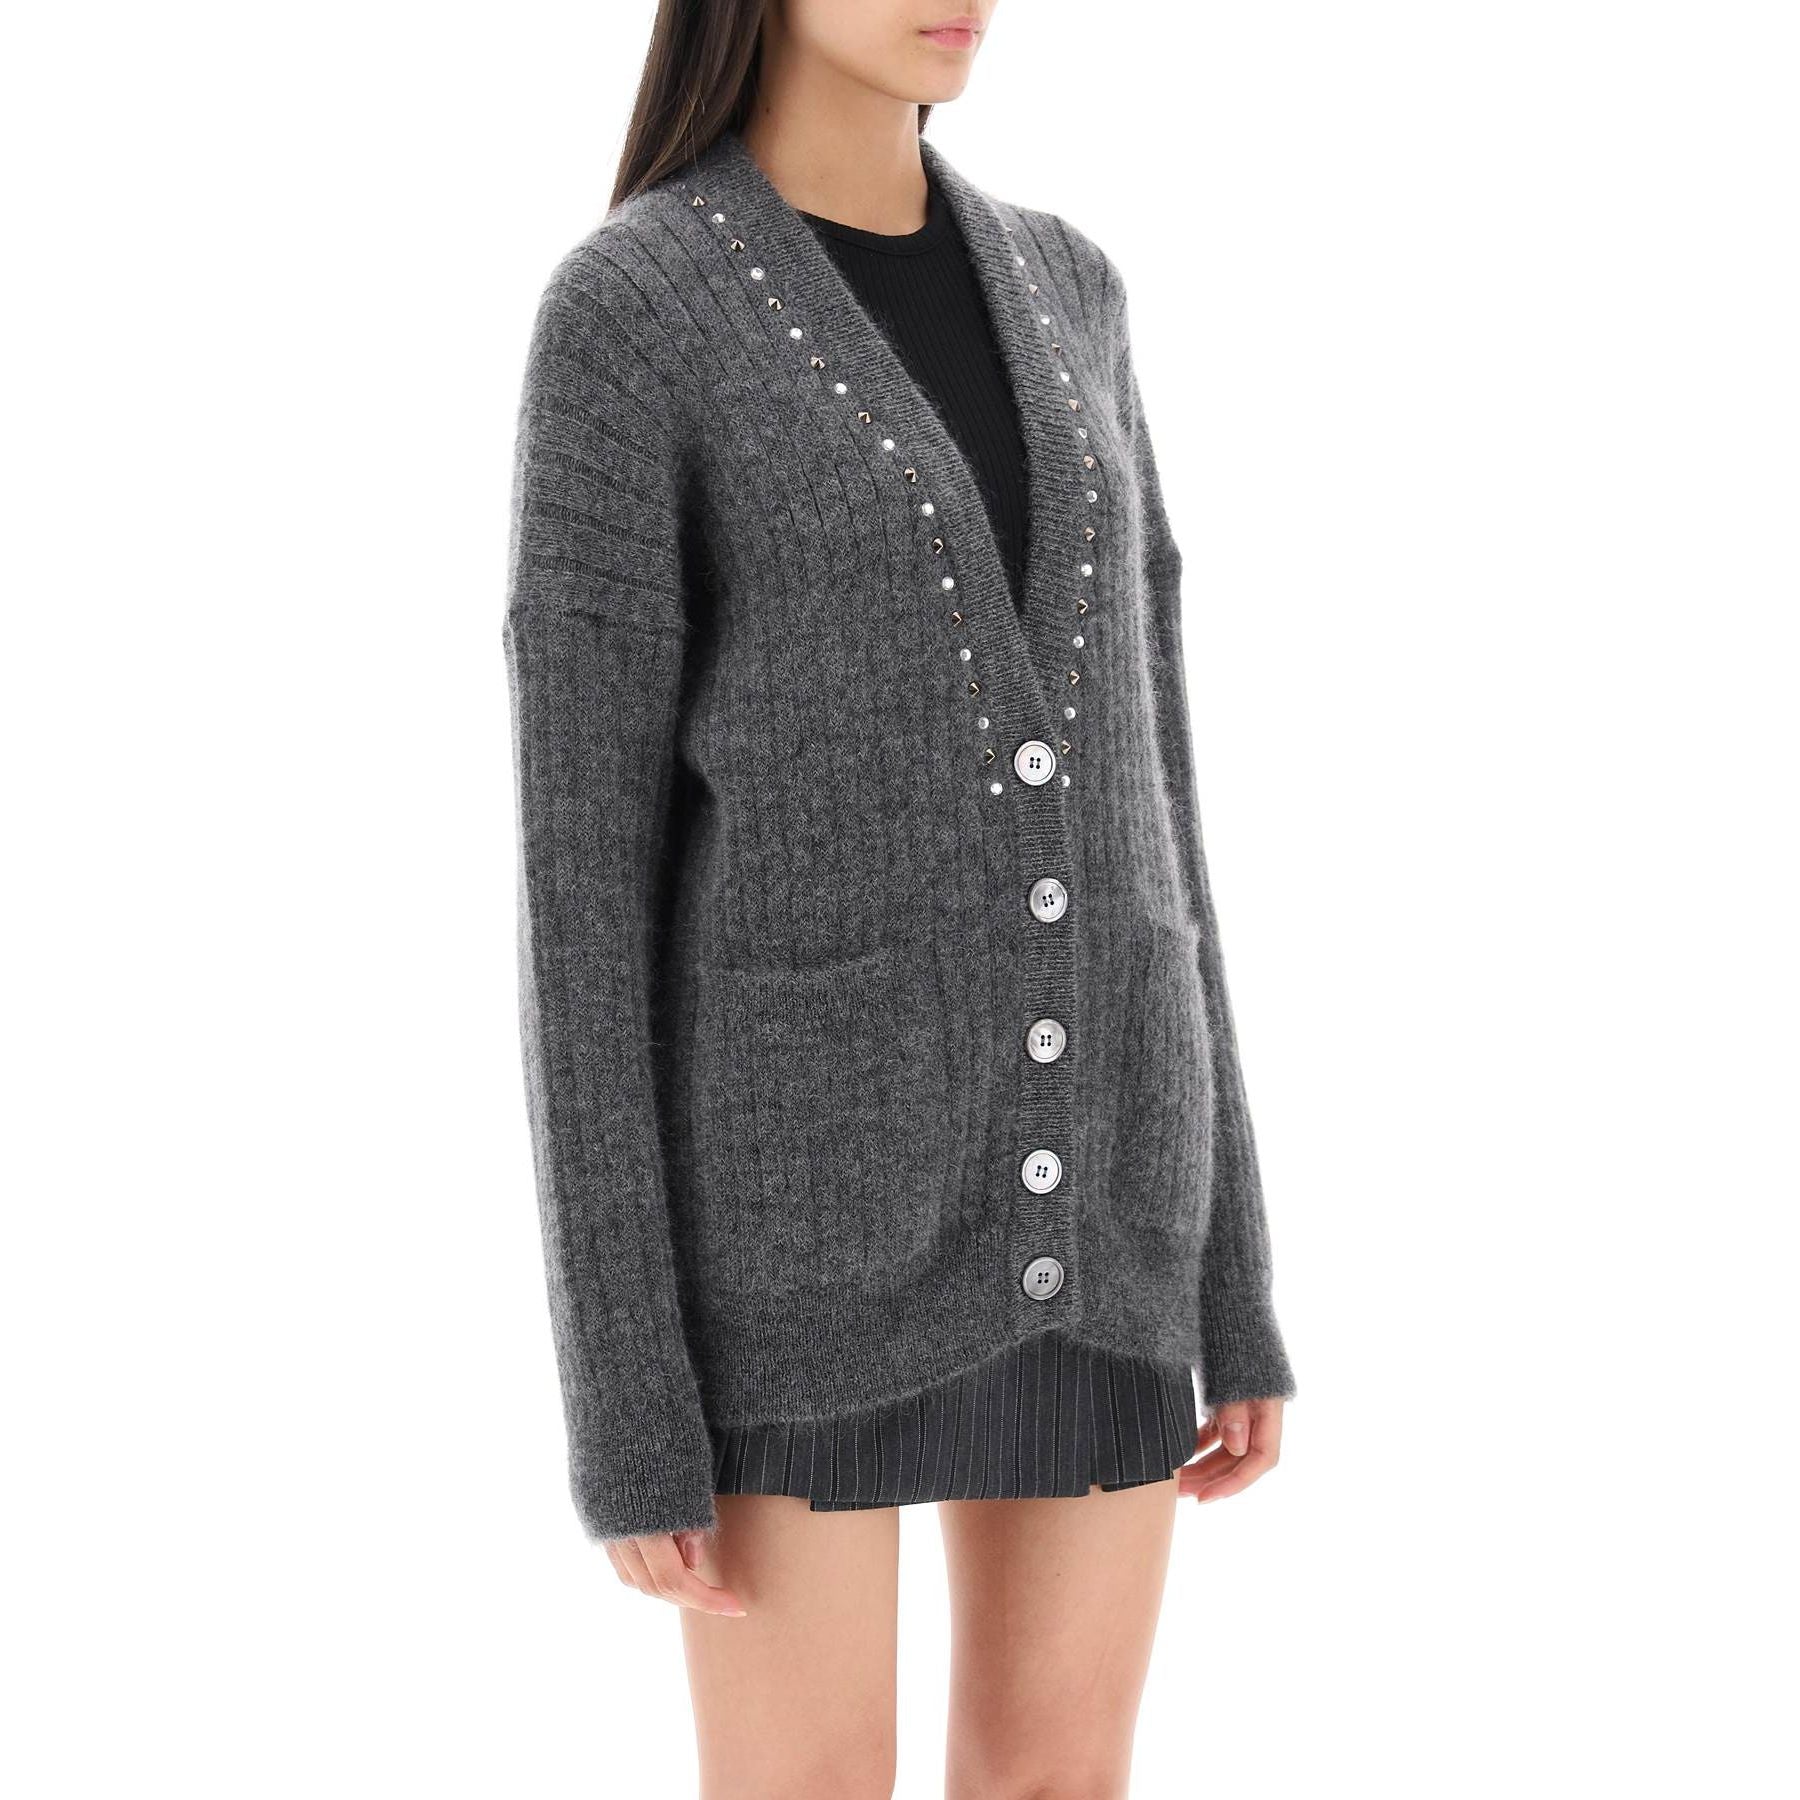 Virgin Wool Blend Ribbed Cardigan with Studs and Crystals